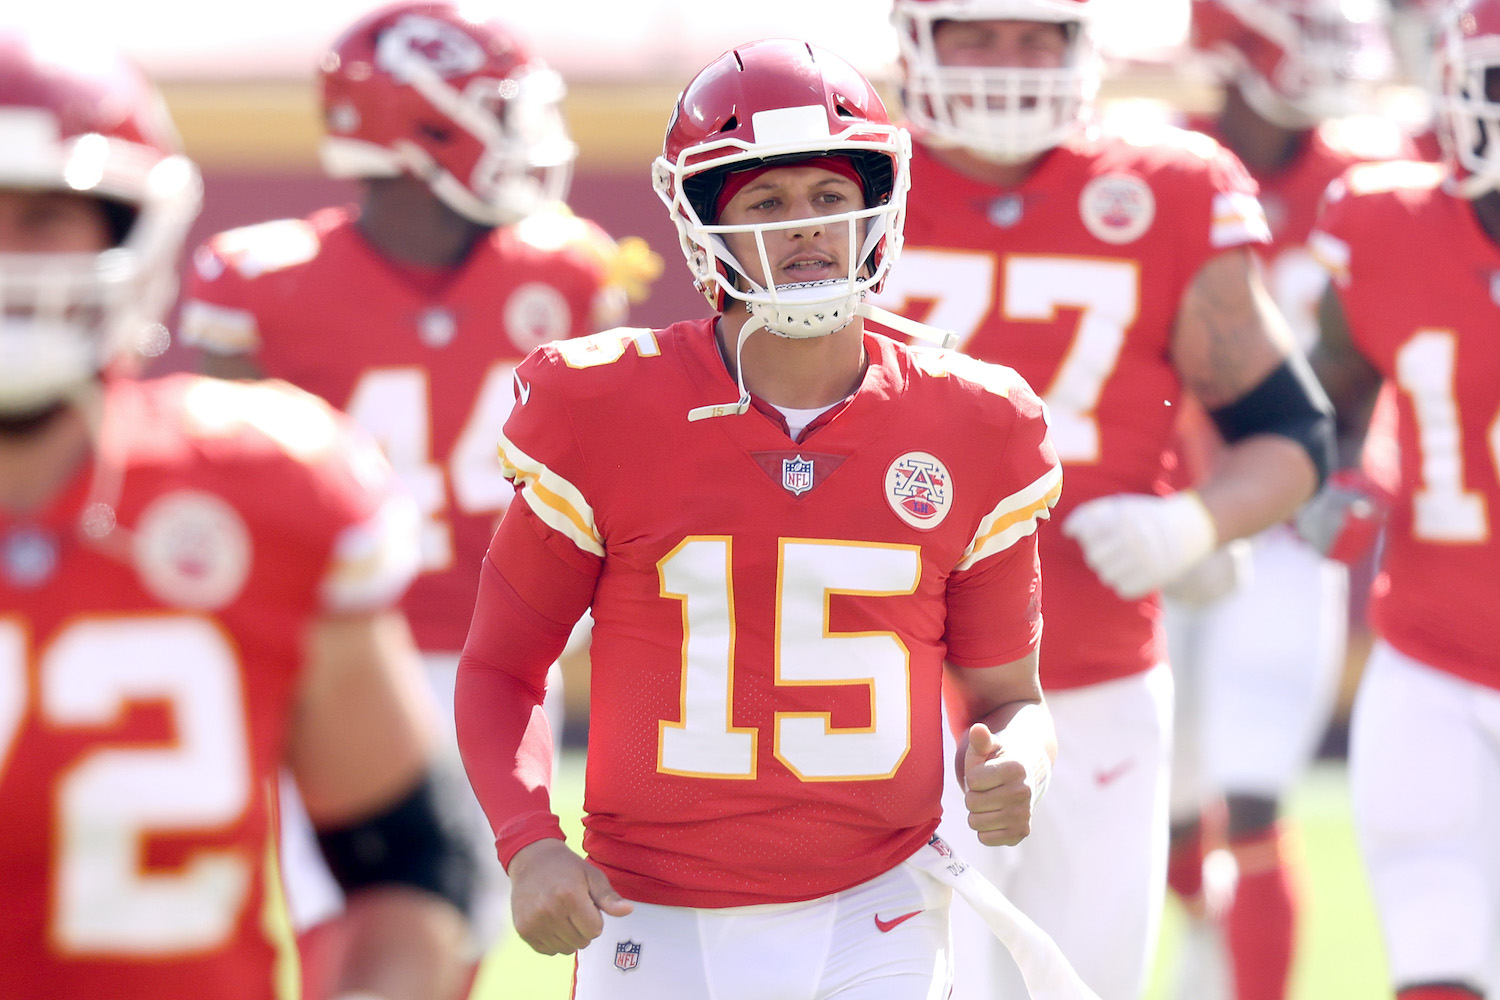 Patrick Mahomes inked a contract worth up to $500 million with the Chiefs, but money and Super Bowls aren't the only reasons he wants to stay in Kansas City.